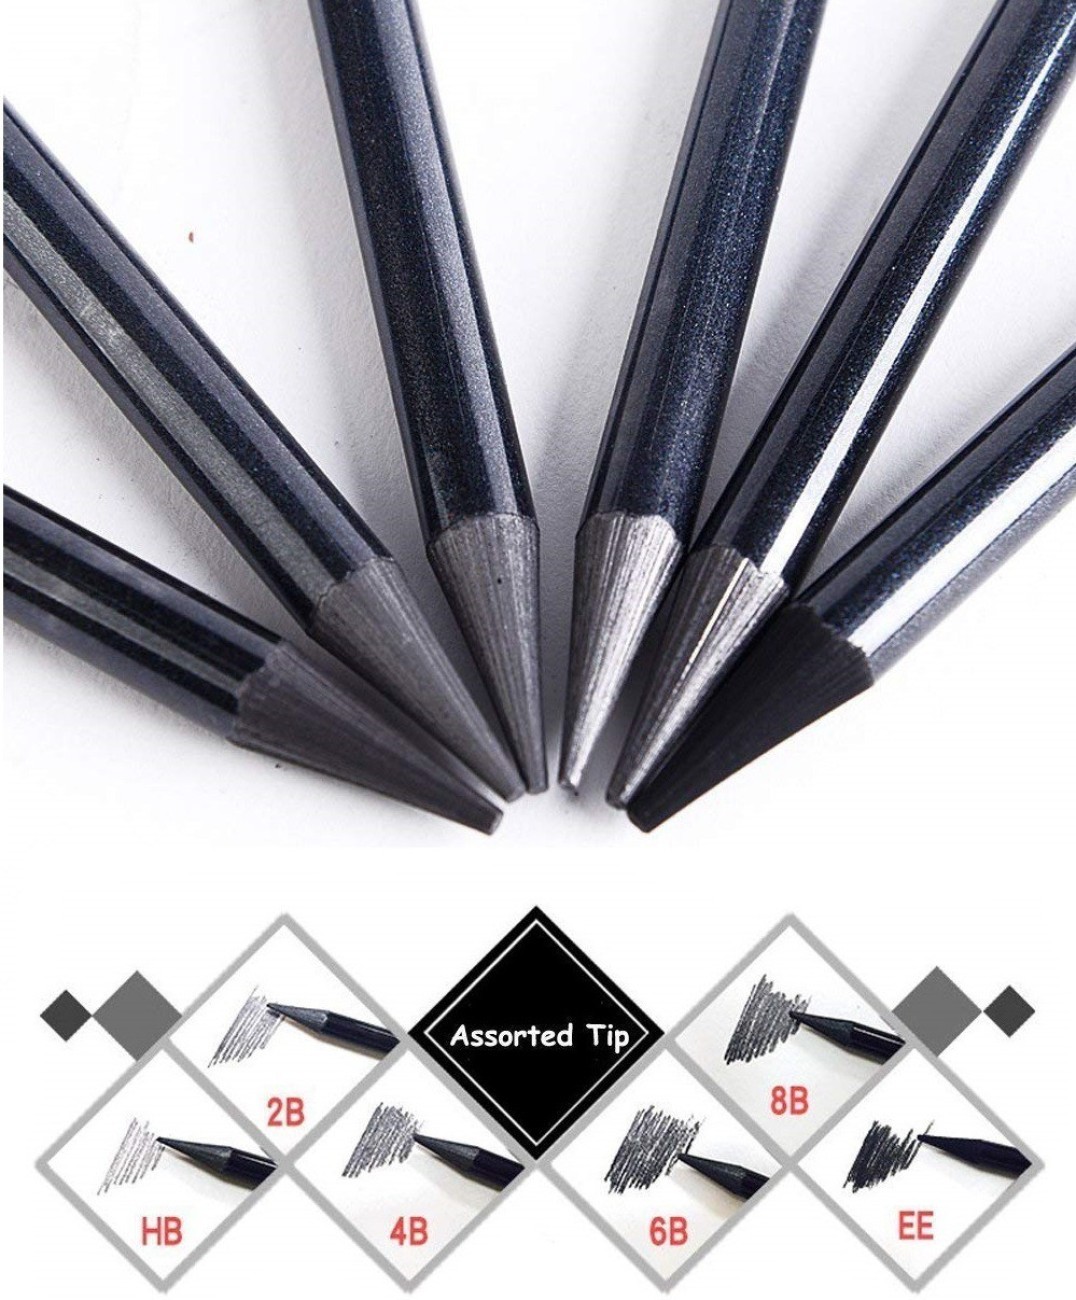 Definite Woodless Graphite Charcoal Pencils - HB, 2B, 4B,  6B, 8B and EE (Pack of 6) and One Kneadable Eraser for Charcoal and Pastel  Pencils; Ideal Drawing Set for Students